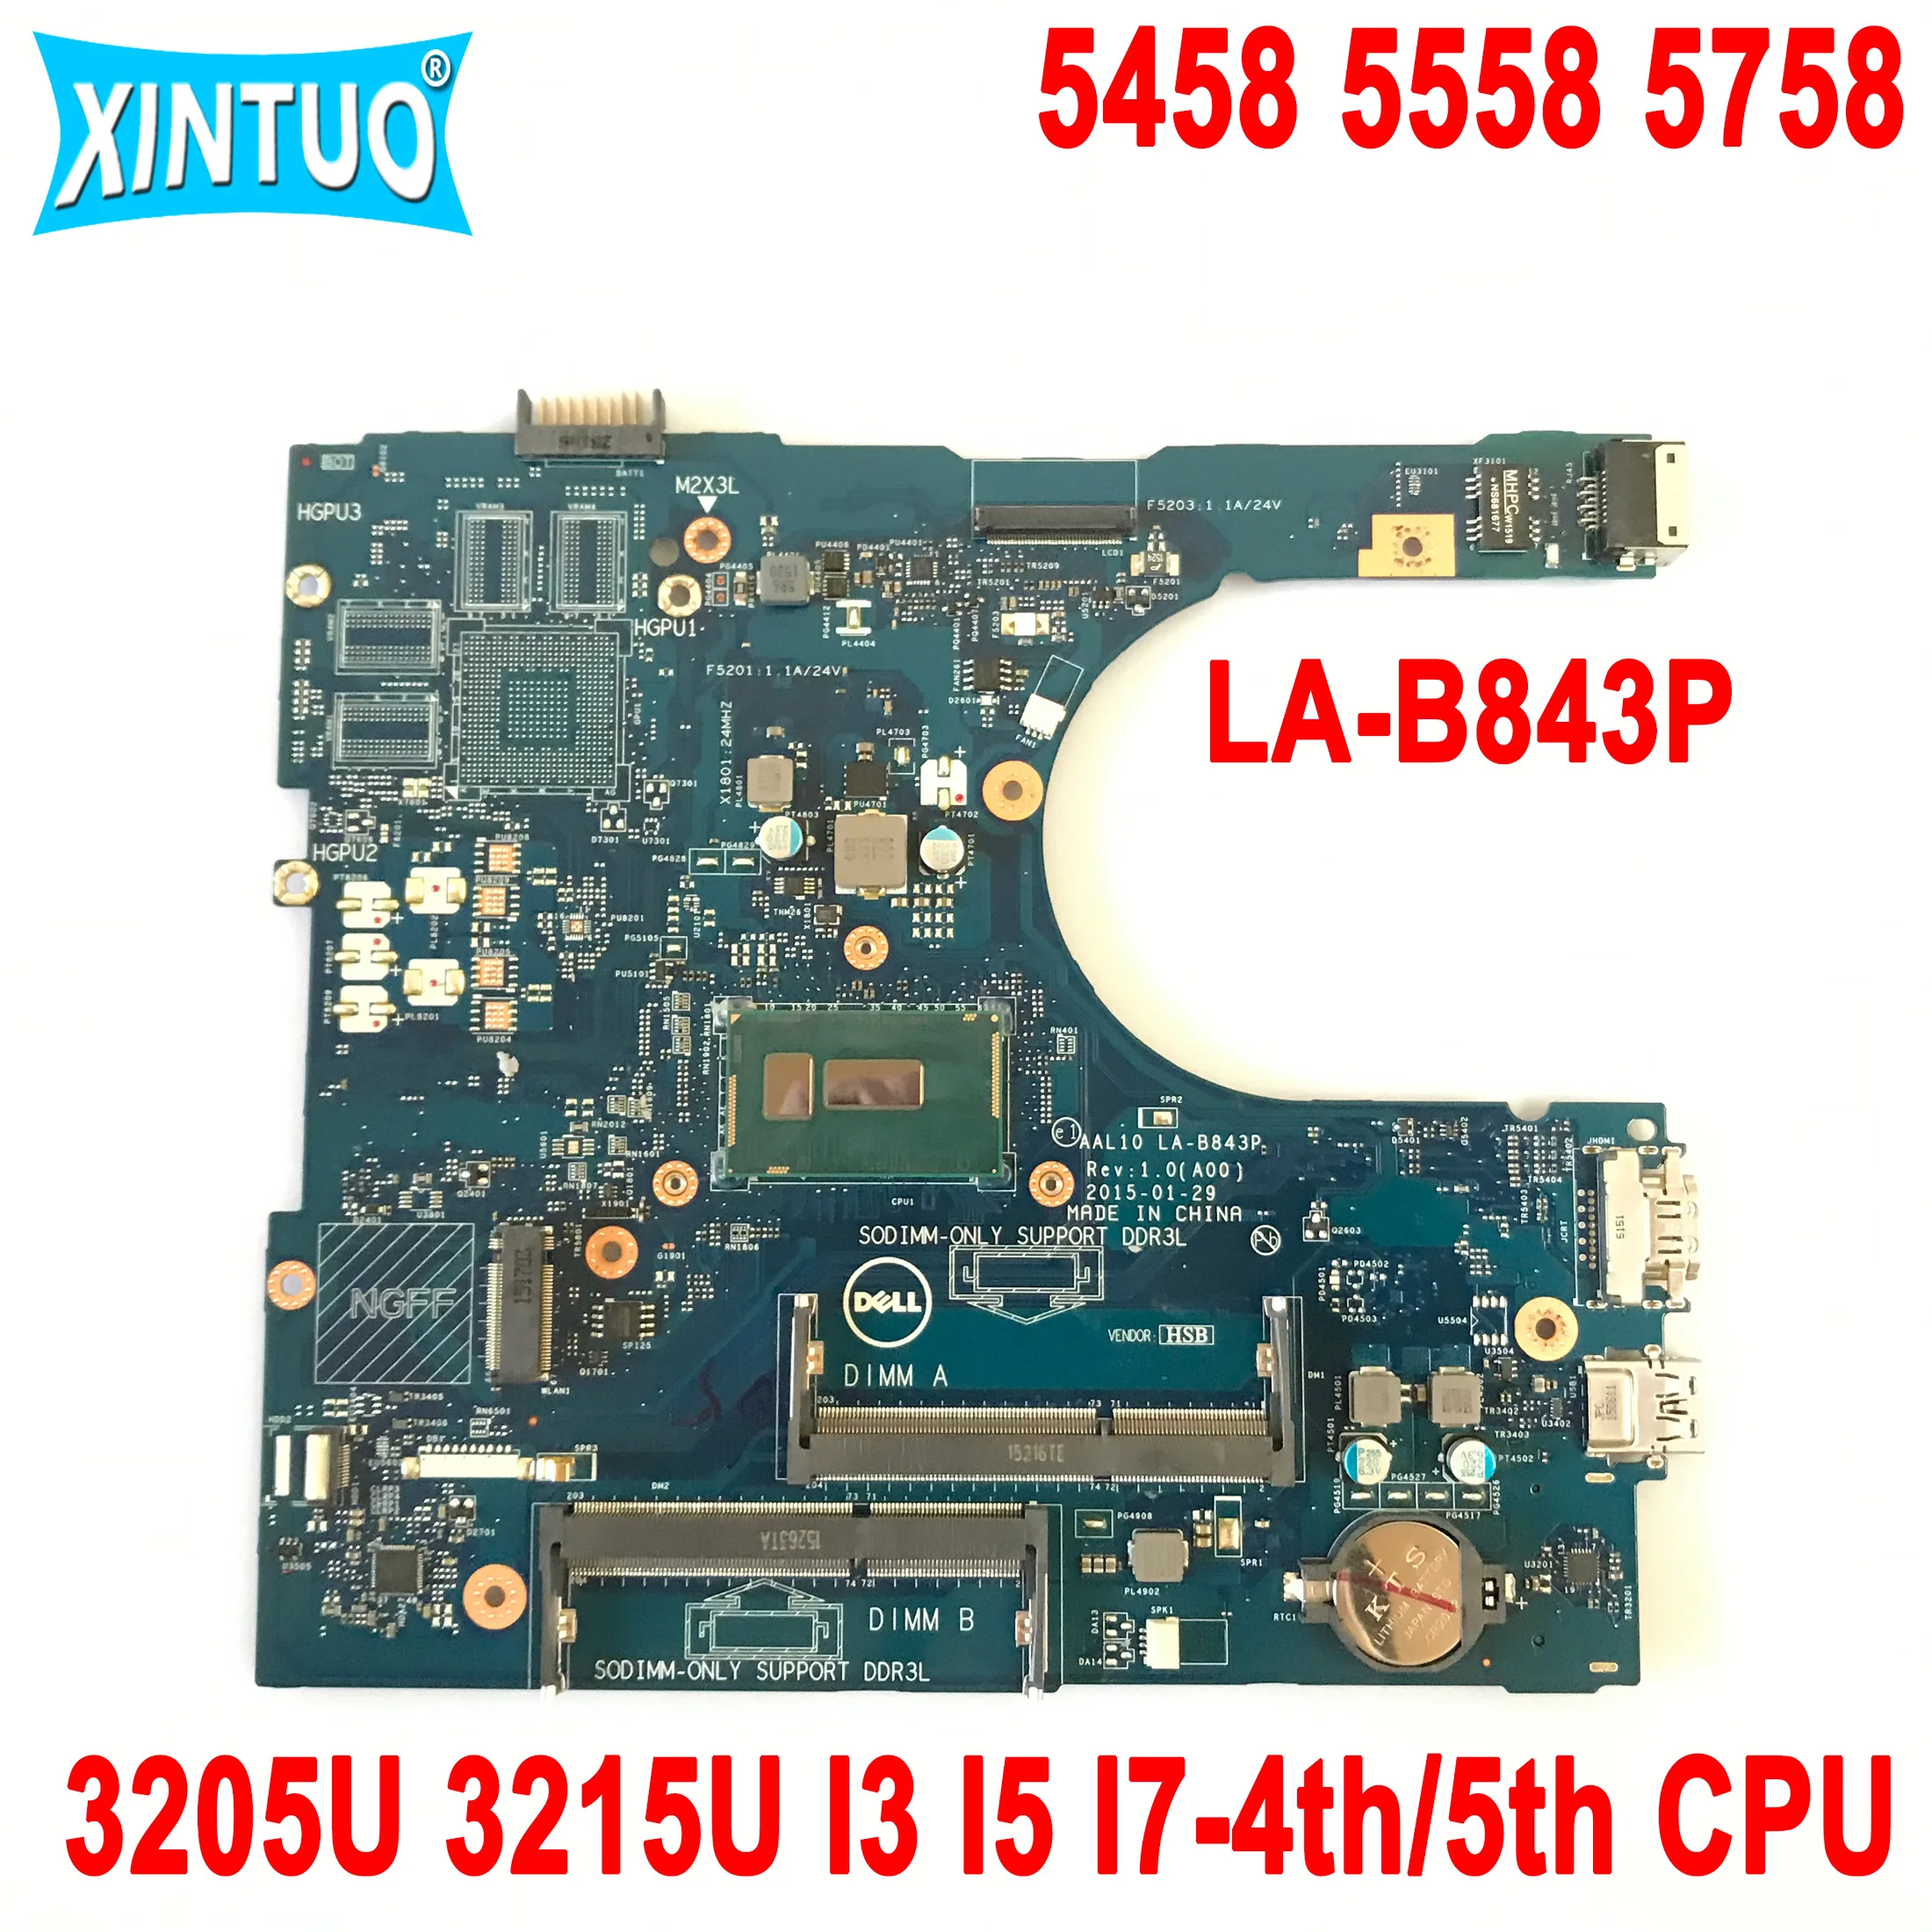 For Dell Inspiron 5458 5558 5758 Laptop Motherboard AAL10 LA-B843P with 3205U 3215U I3 I5 I7-4th/5th CPU DDR3 100% Test Work